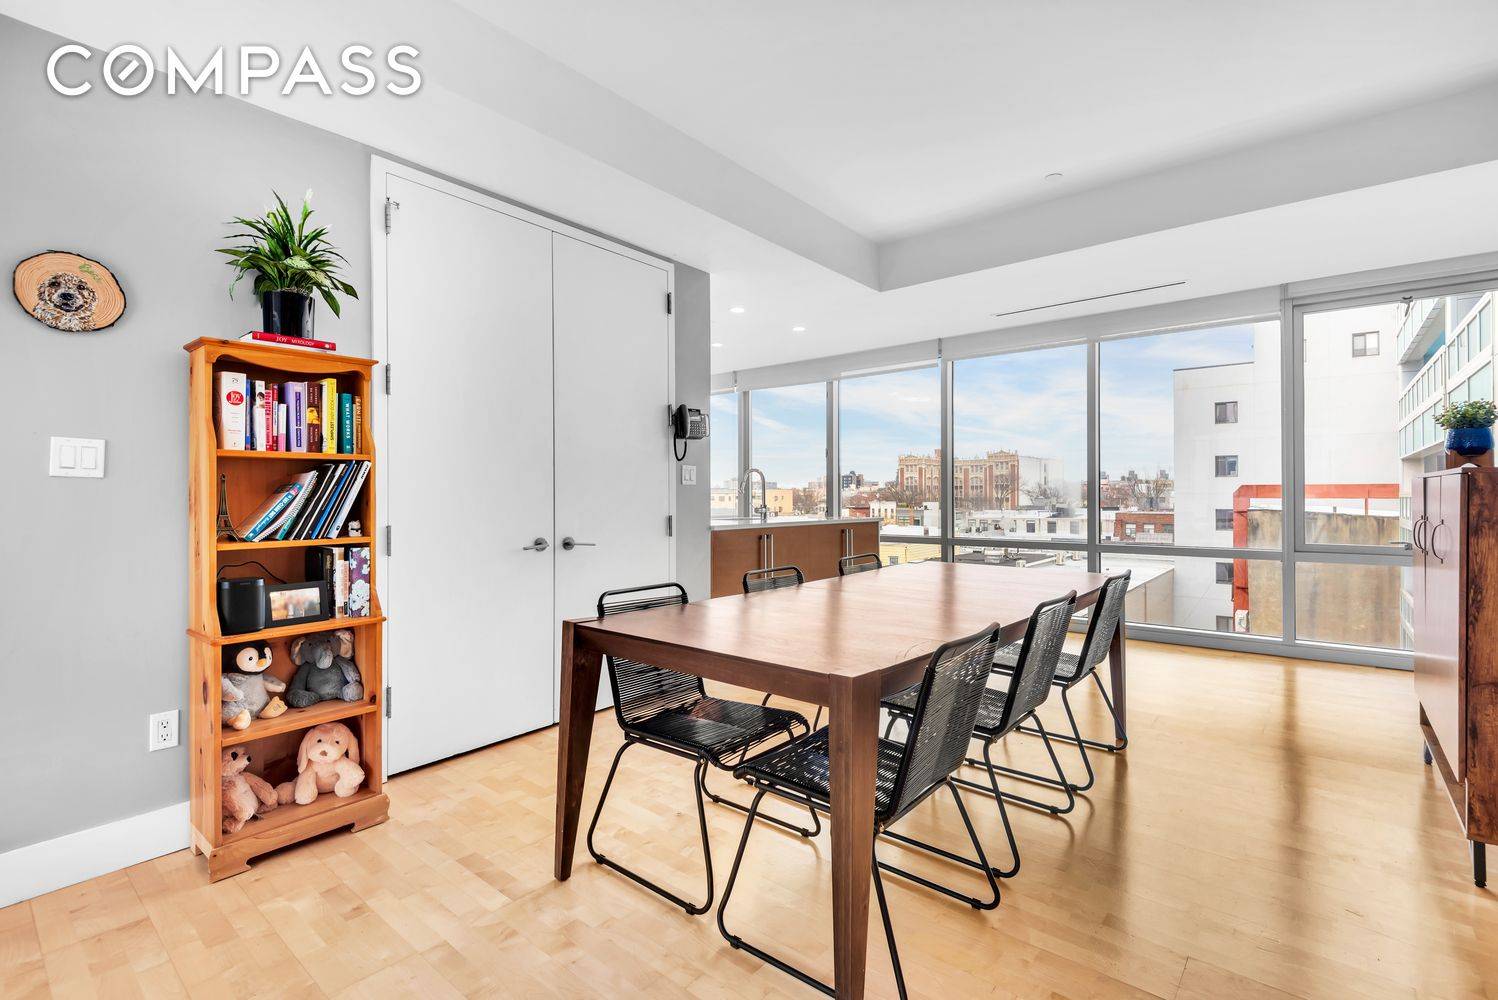 Welcome home to a stylish and spacious 2 bed, 2 bath home in the The Absolute Condominium, Clinton hill.